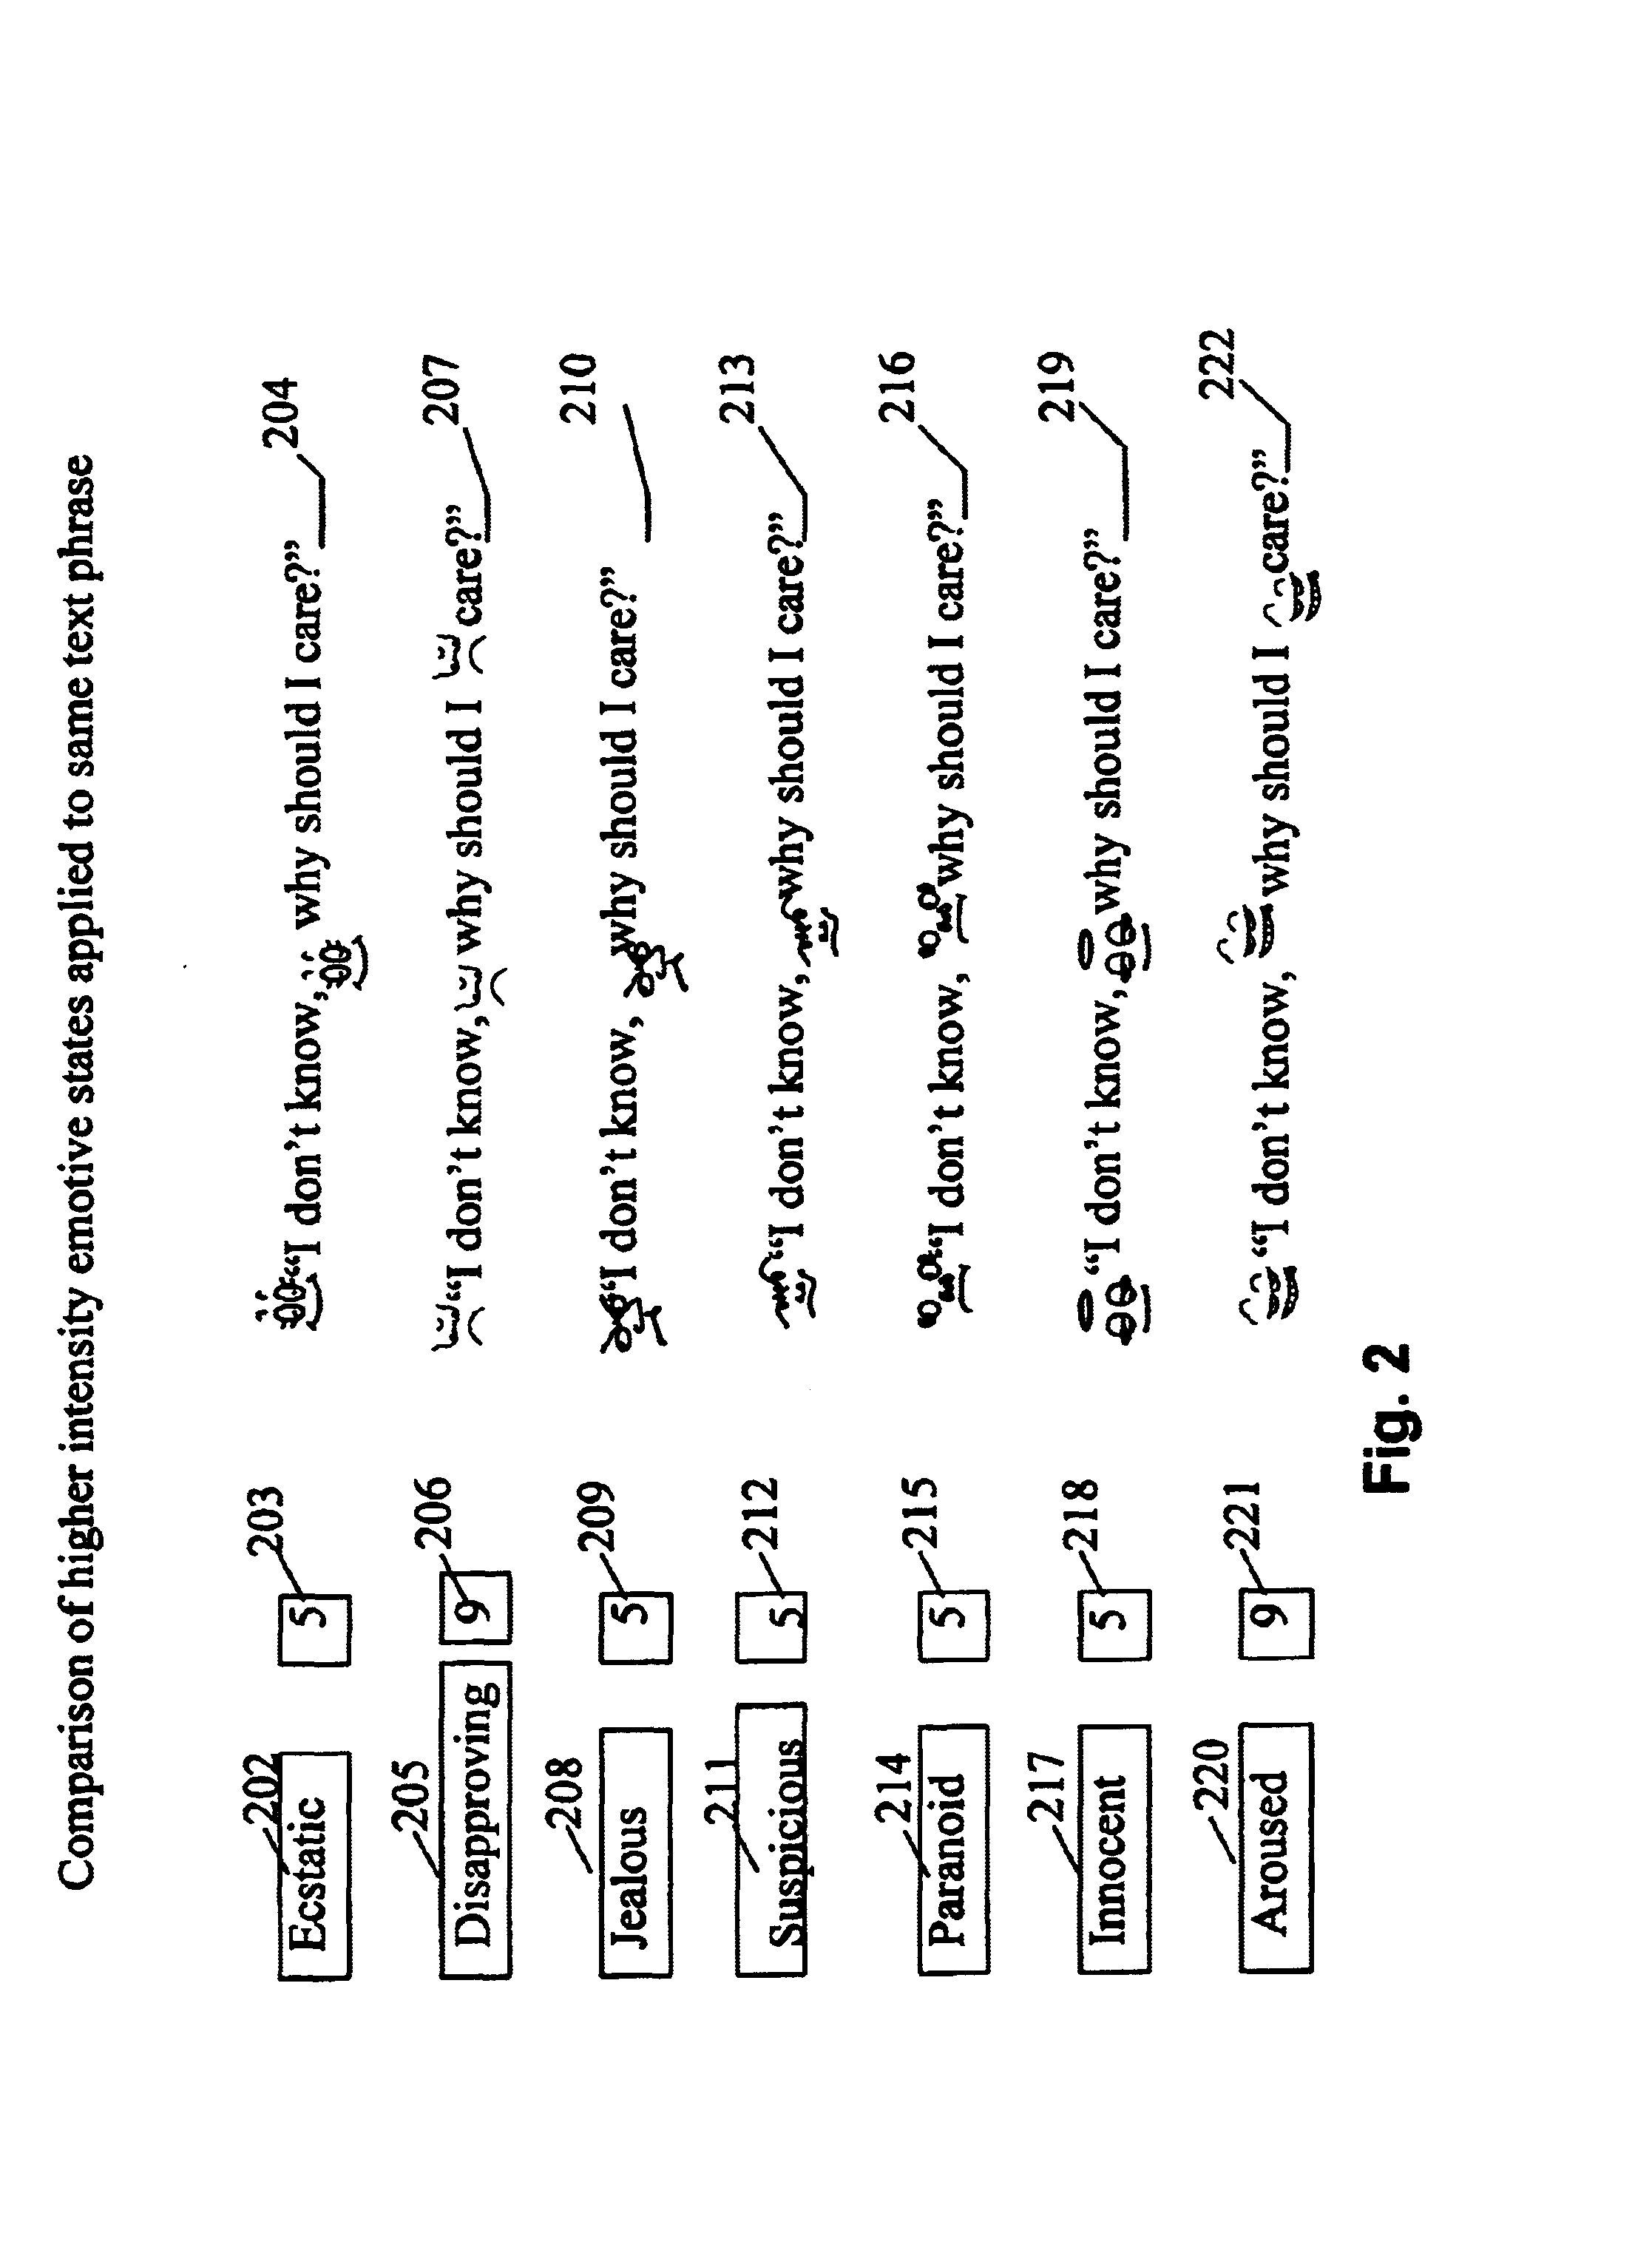 System and method for embedment of emotive content in modern text processing, publishing and communication